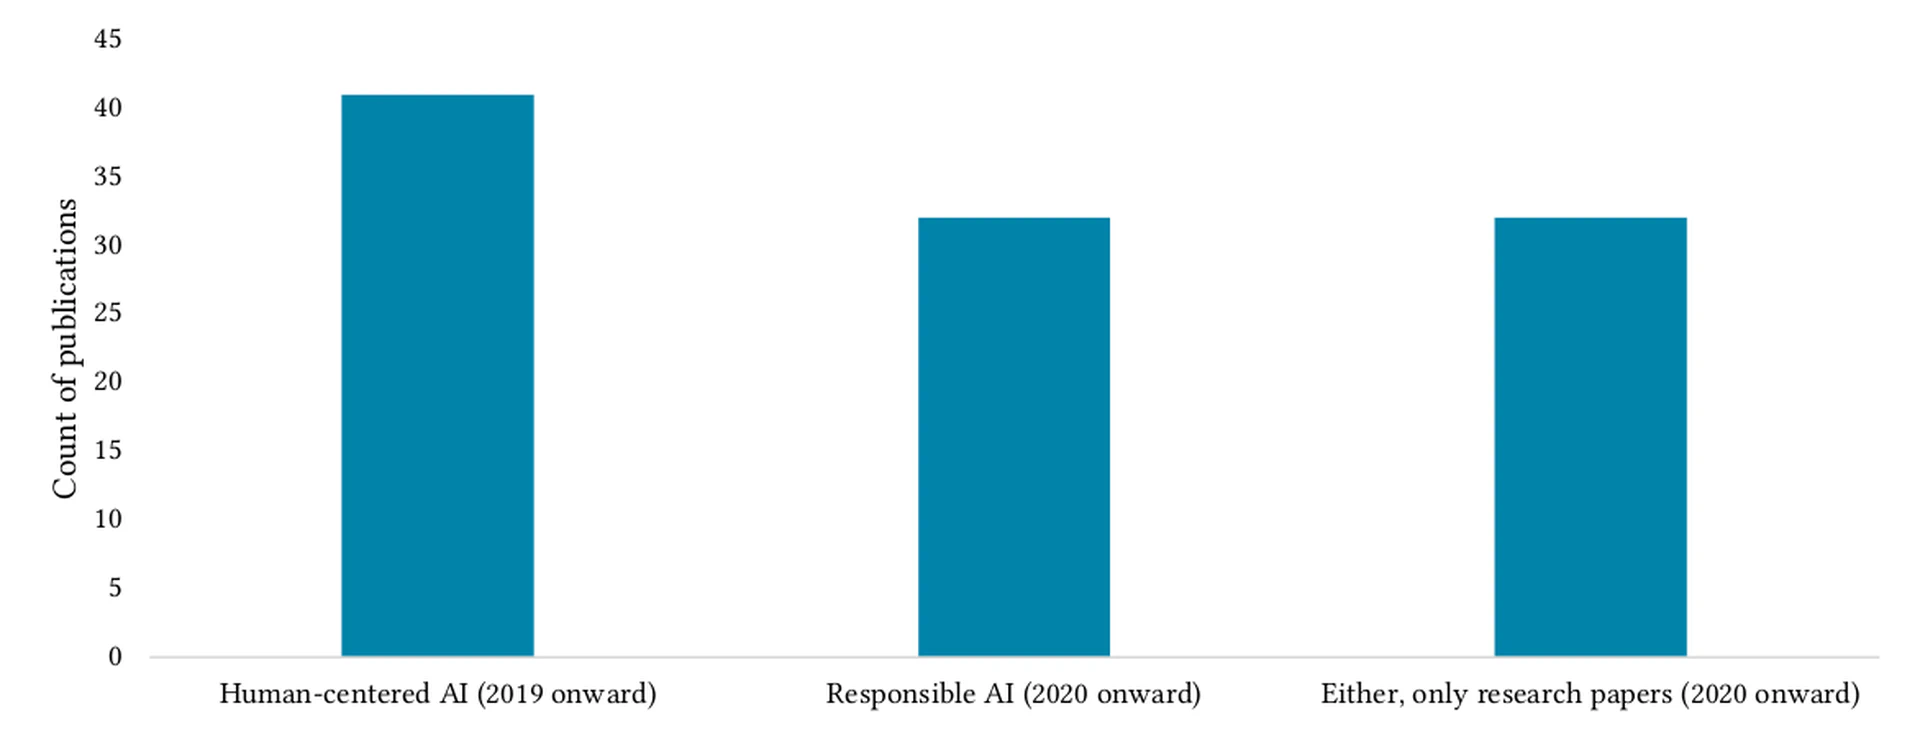 Counts of publications containing “human-centered AI” and “responsible AI” at CHI. The first three bars for human-centered AI and responsible AI are not mutually exclusive. They include all types of materials (e.g., research papers, extended abstracts, and invited talks). Filtering for only research papers results in 32 unique papers since 2020 (the last bar).